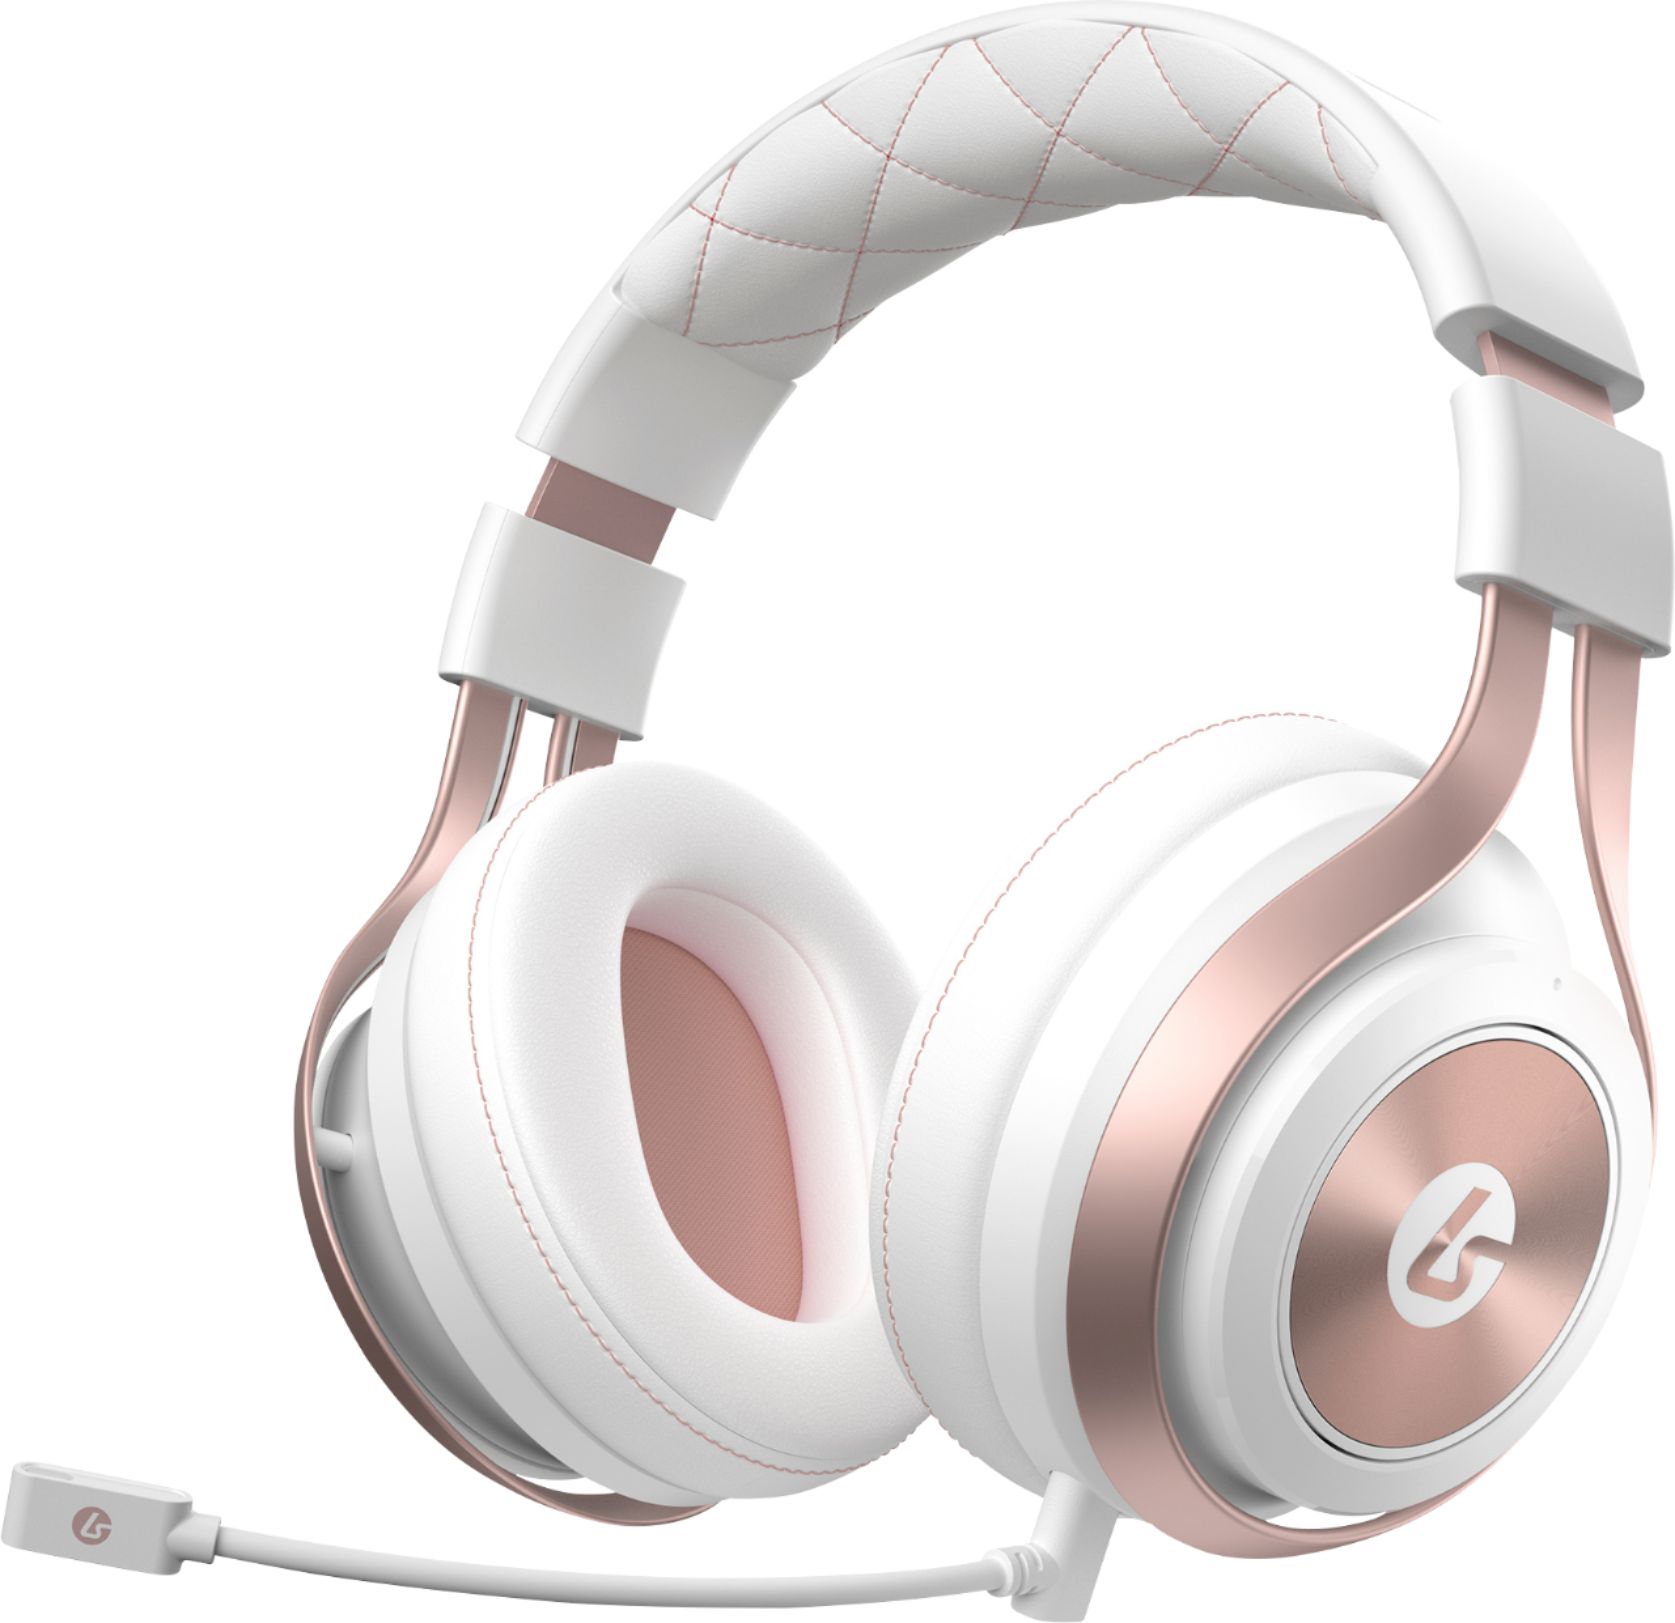 lucid sound gaming headset